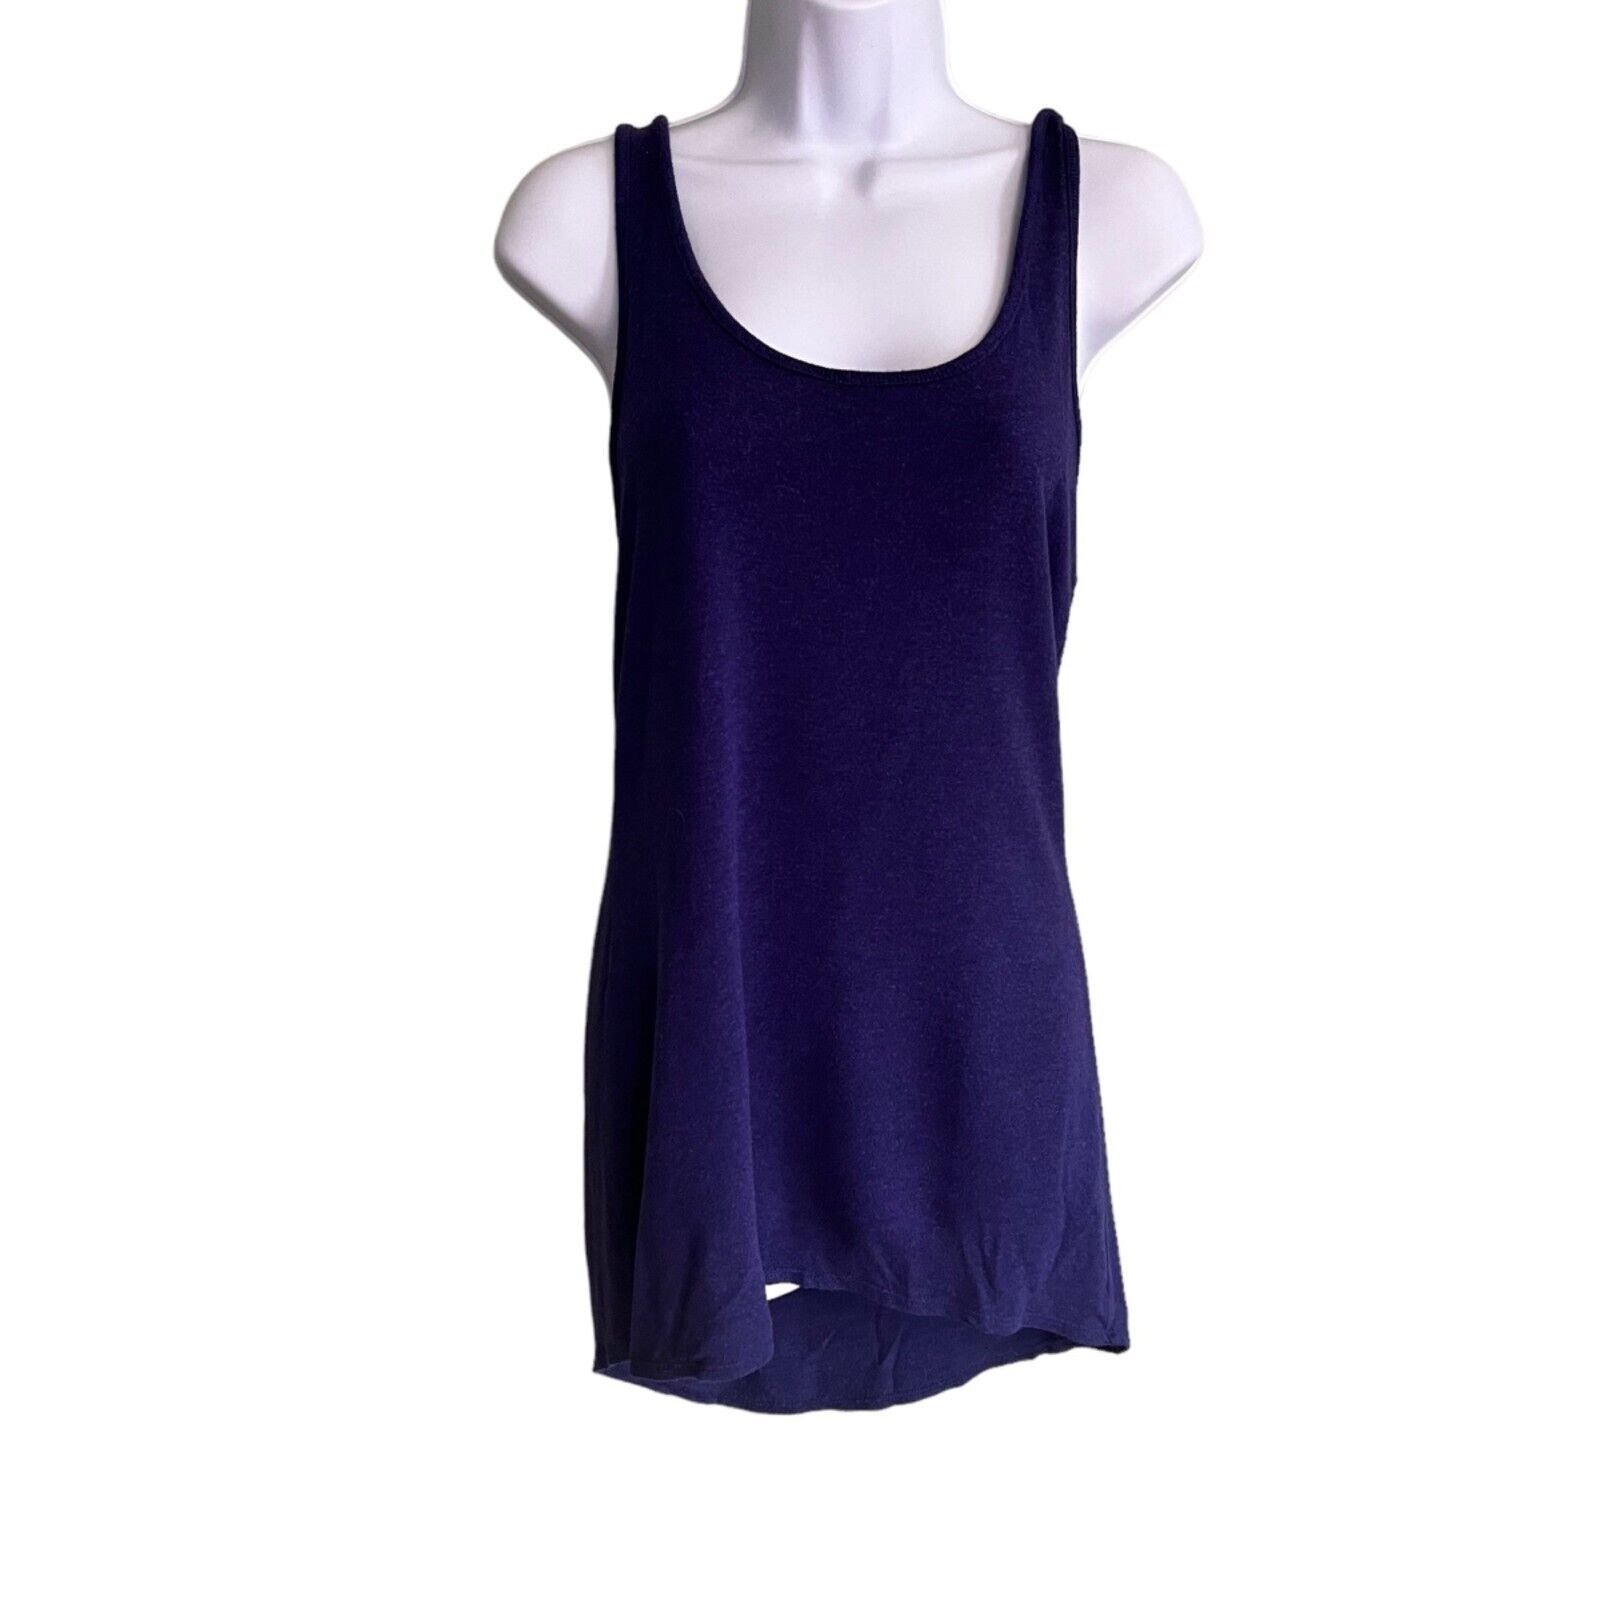 Primary image for ATHLETA Womens Size Small Purple Criss Cross Back Tunic Tank Top Style 982712